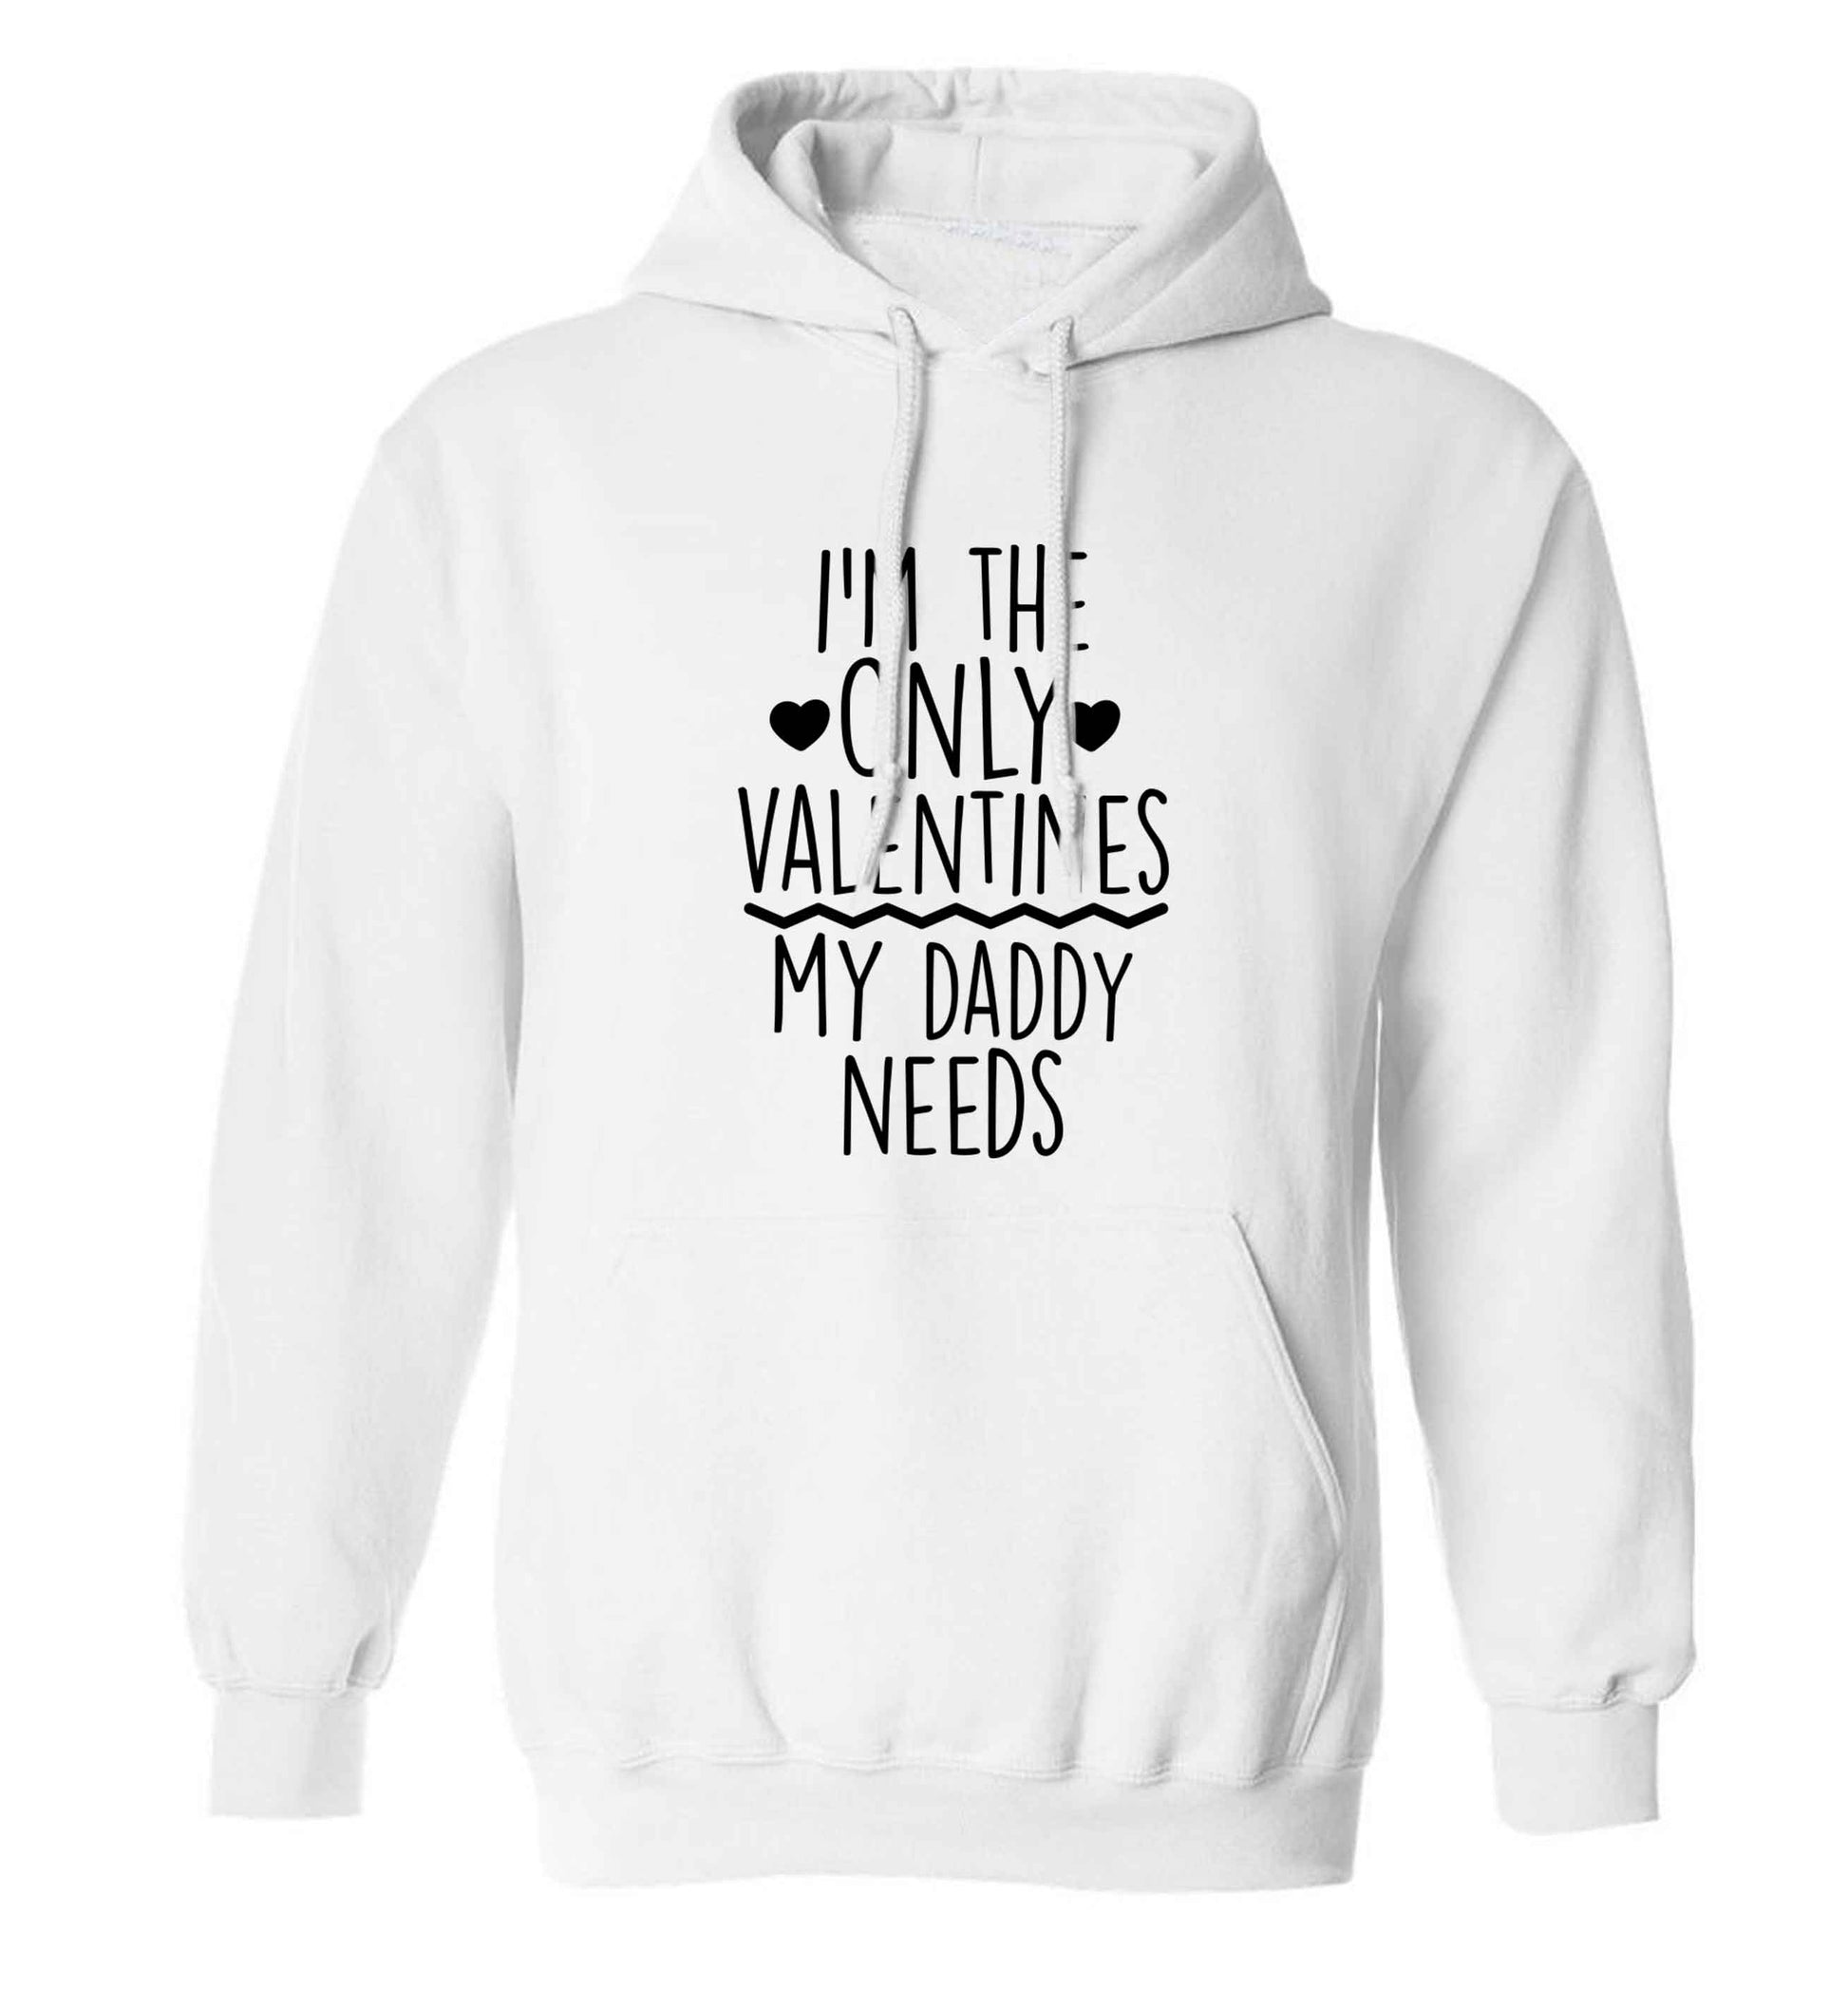 I'm the only valentines my daddy needs adults unisex white hoodie 2XL